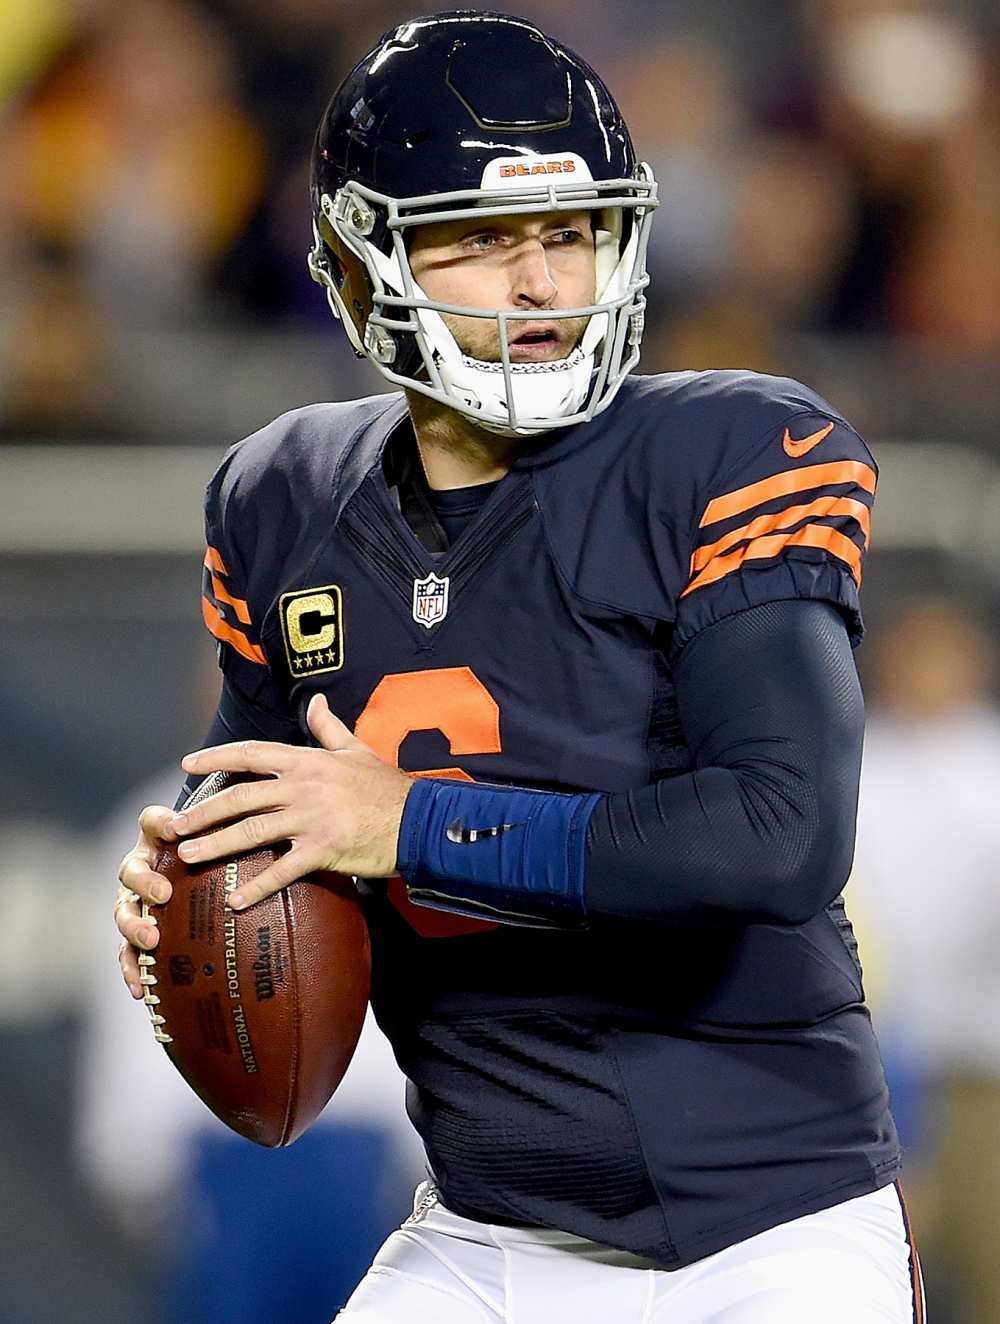 Jay Cutler #6 of the Chicago Bears looks to throw a pass during the first half against the Minnesota Vikings at Soldier Field on October 31, 2016 in Chicago, Illinois.